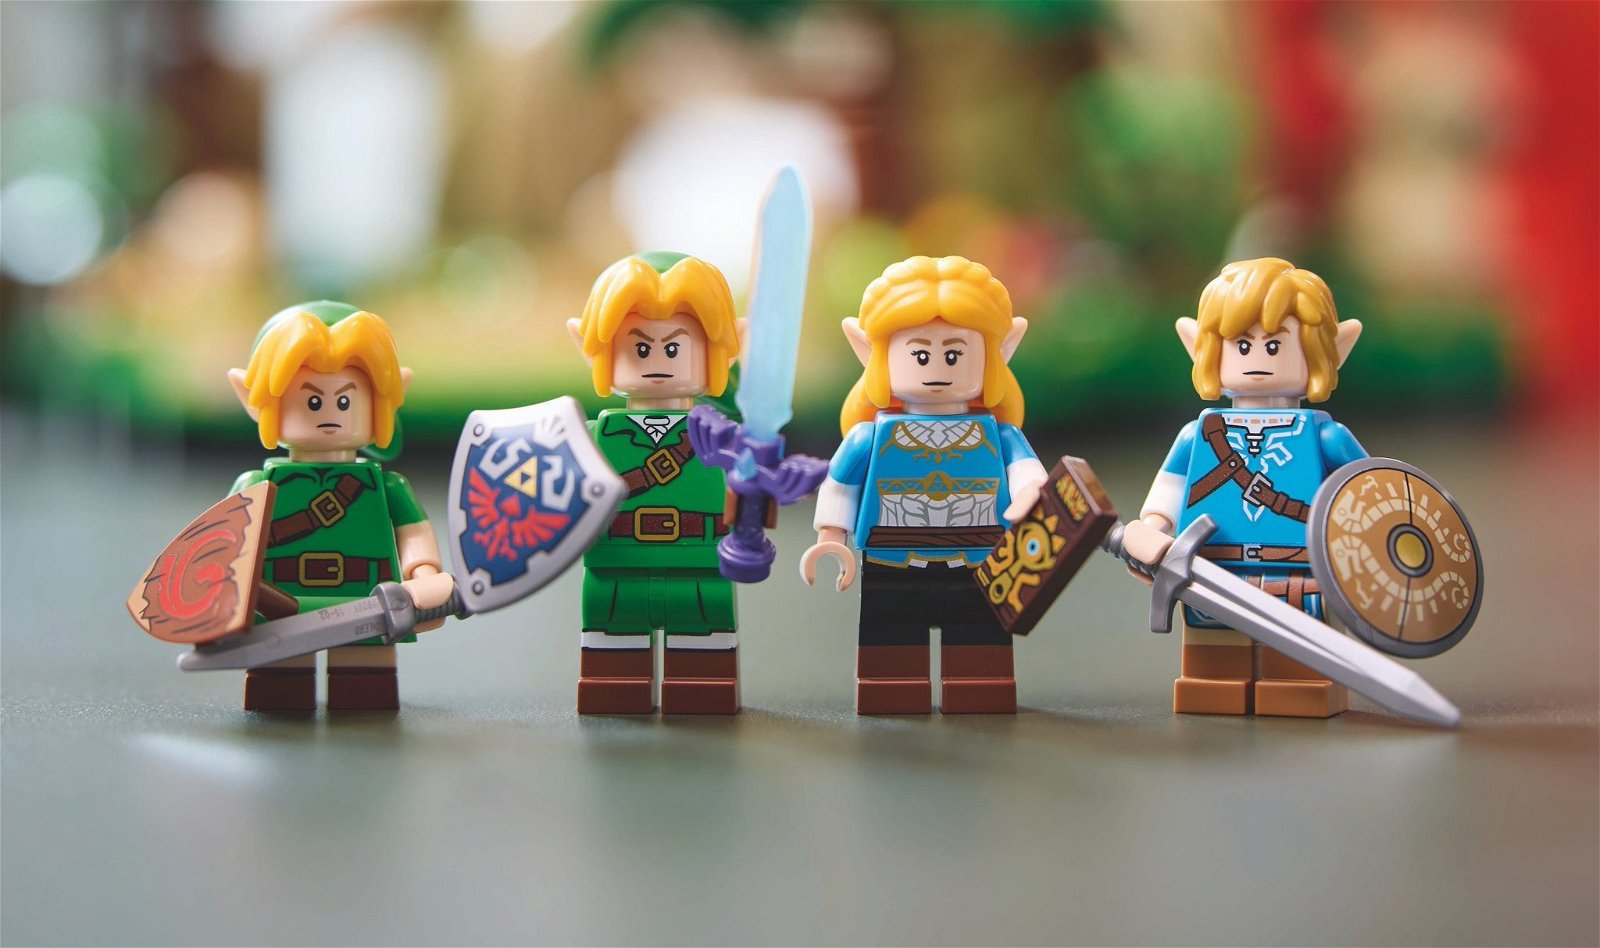 Yes, The Legend of Zelda LEGO set is finally official